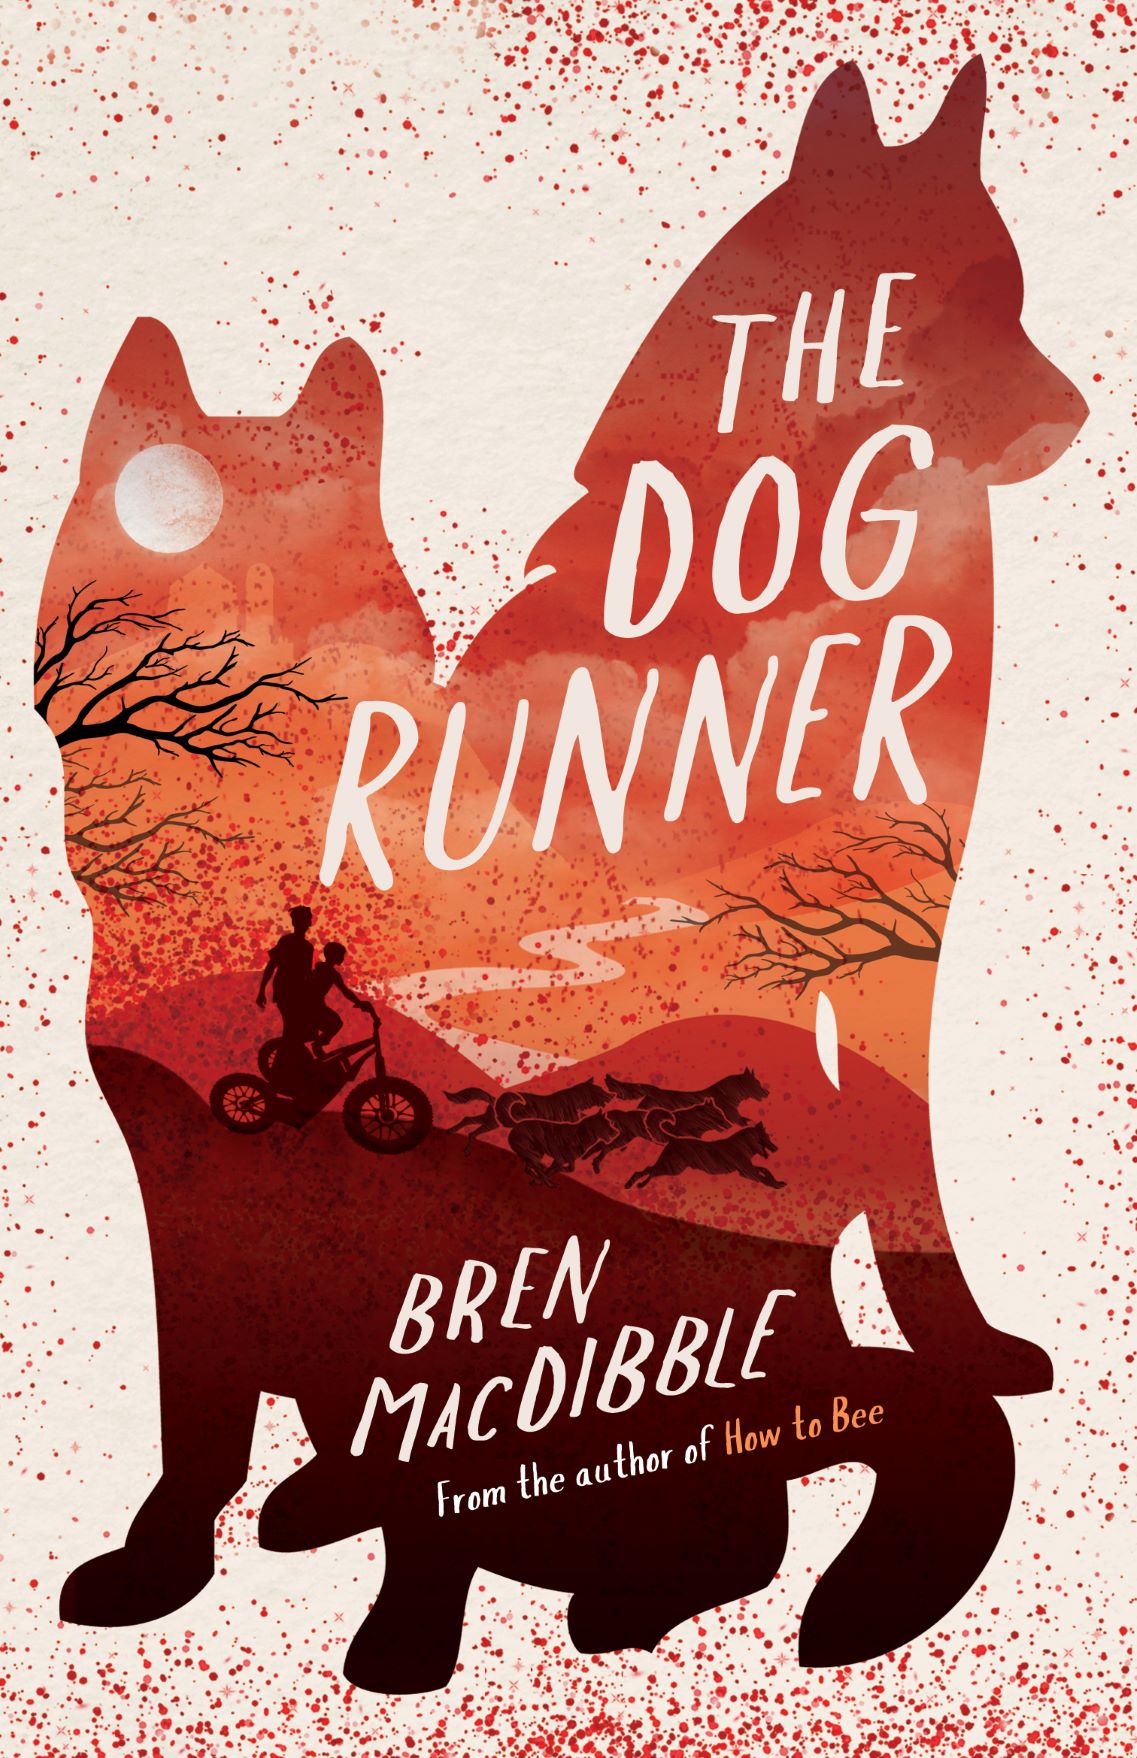 The Dog Runner, book cover